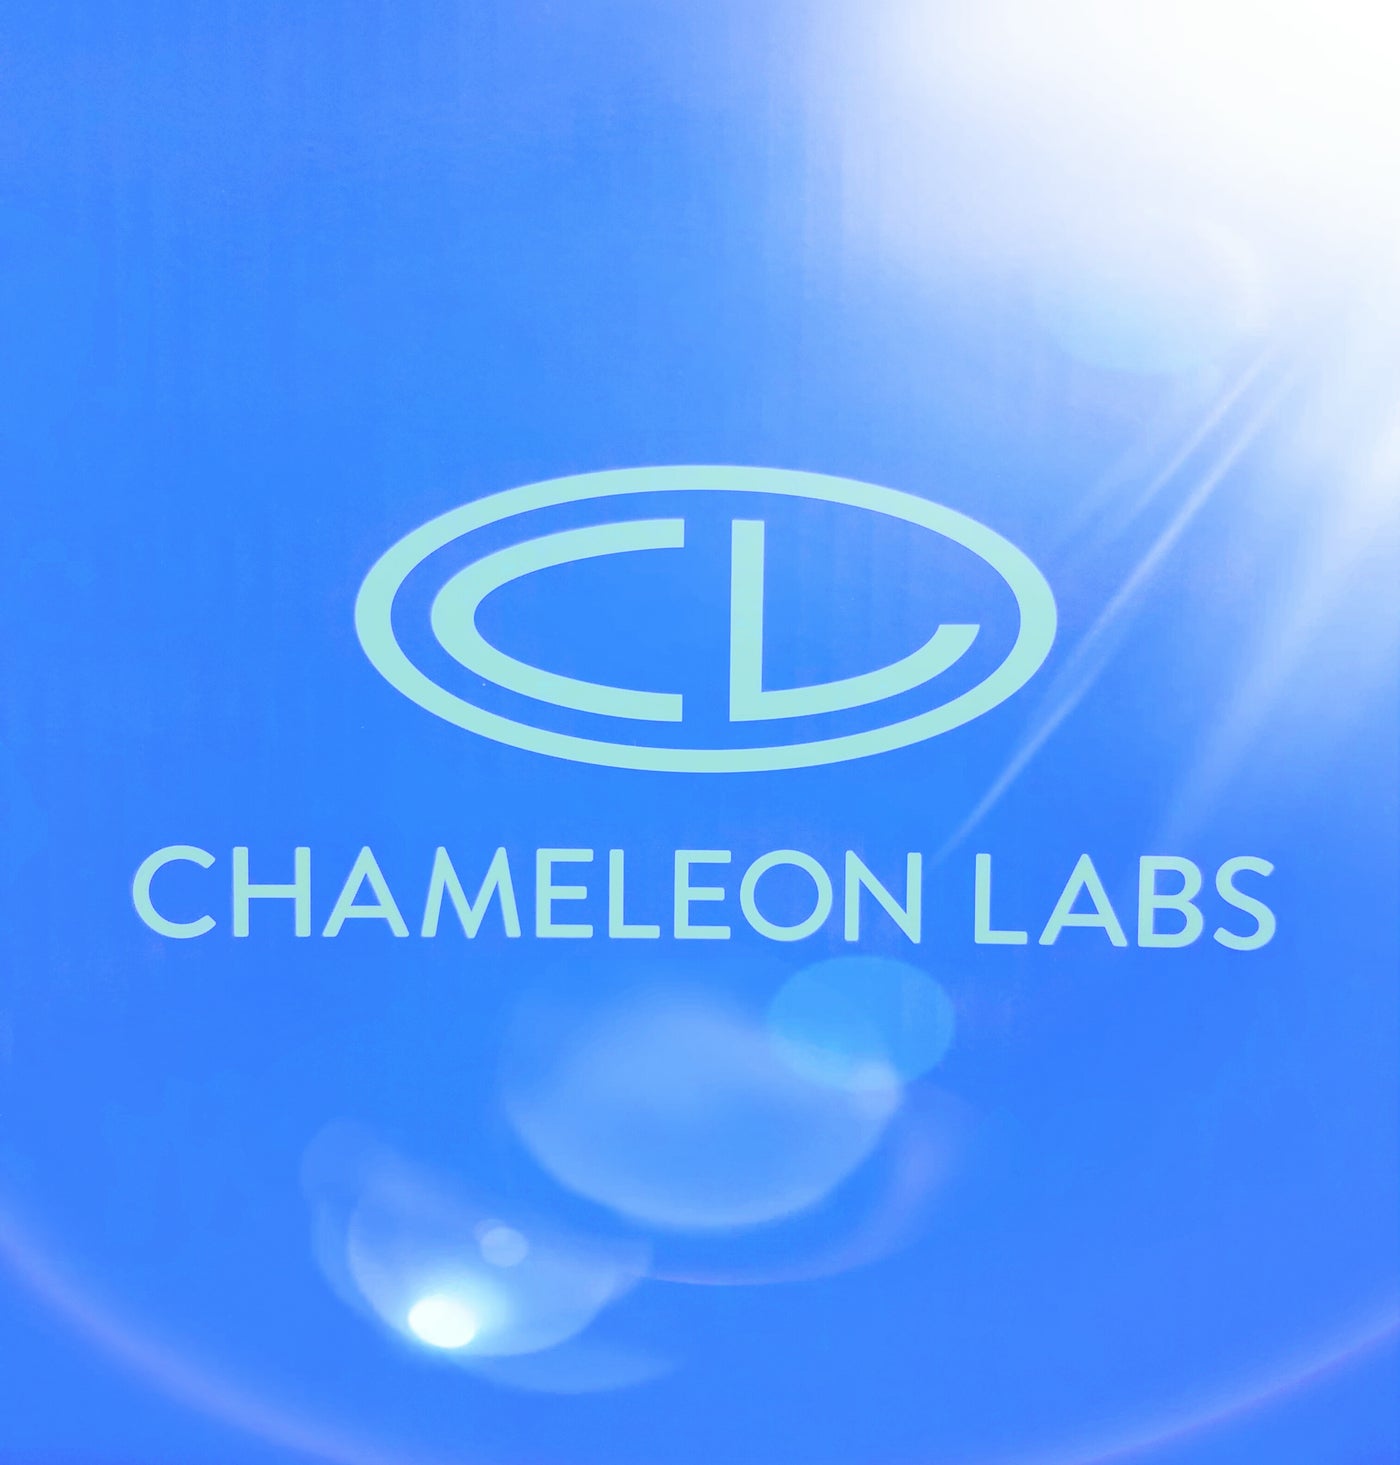 New Generation of Chameleon Labs Gear